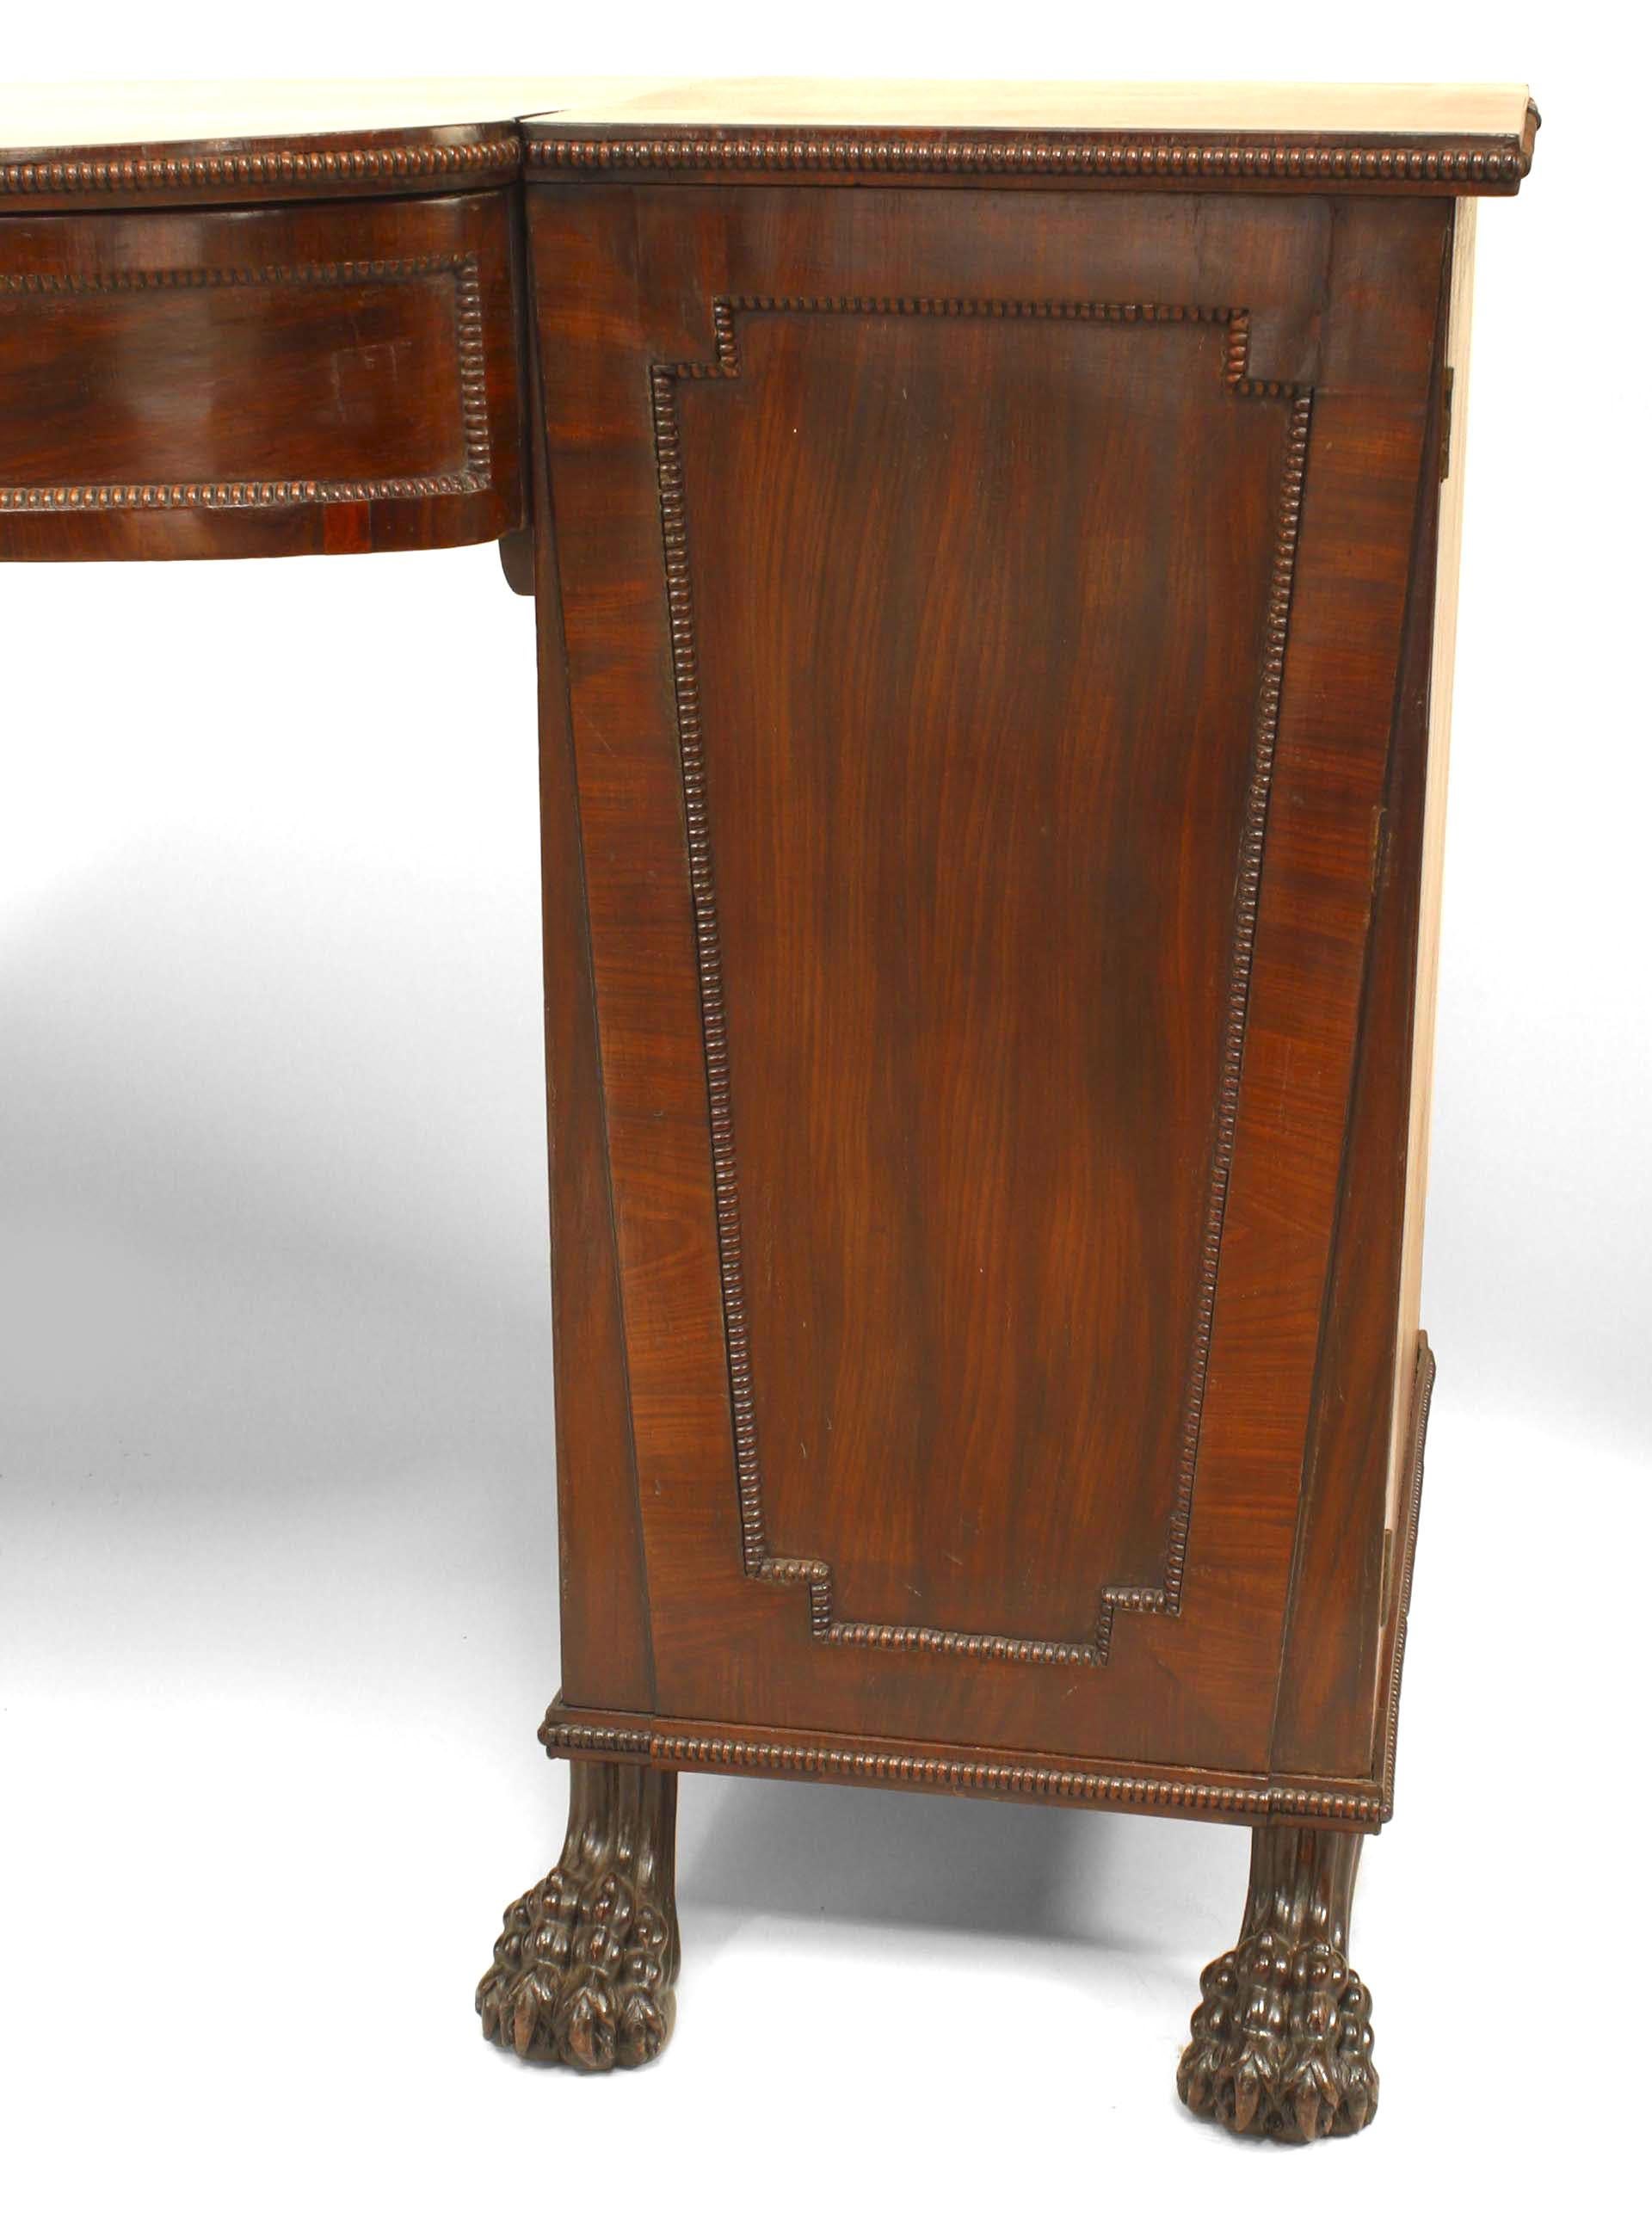 English Georgian (18/19th Century) mahogany sideboard with two pedestal side cabinets with doors supported on claw feet.
